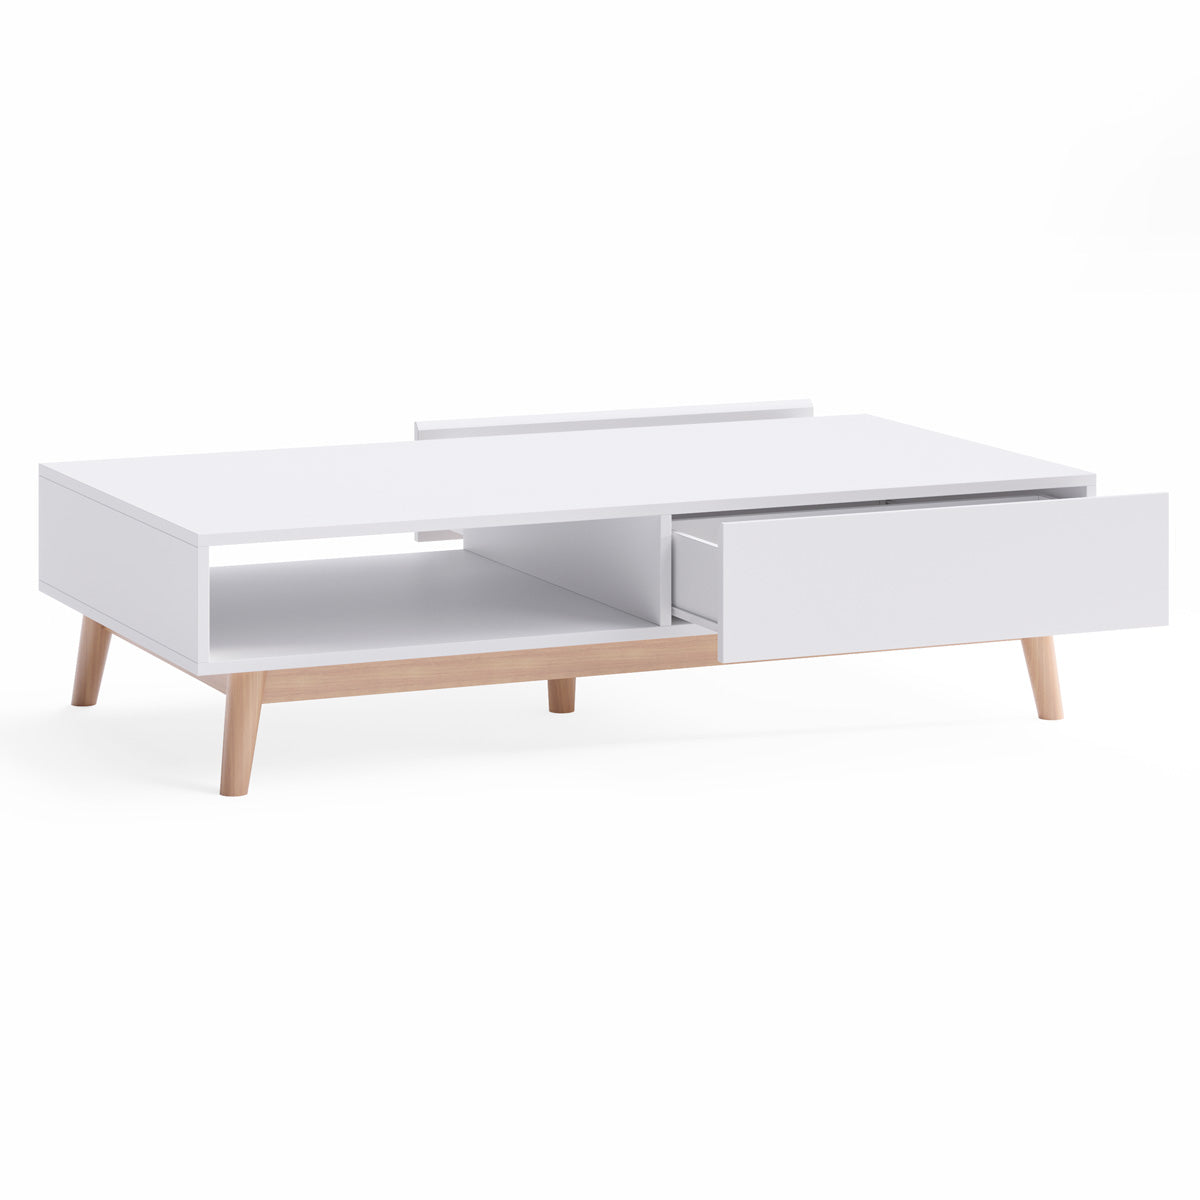 White Coffee Table with Solid Wood Legs (Aspen Collection)